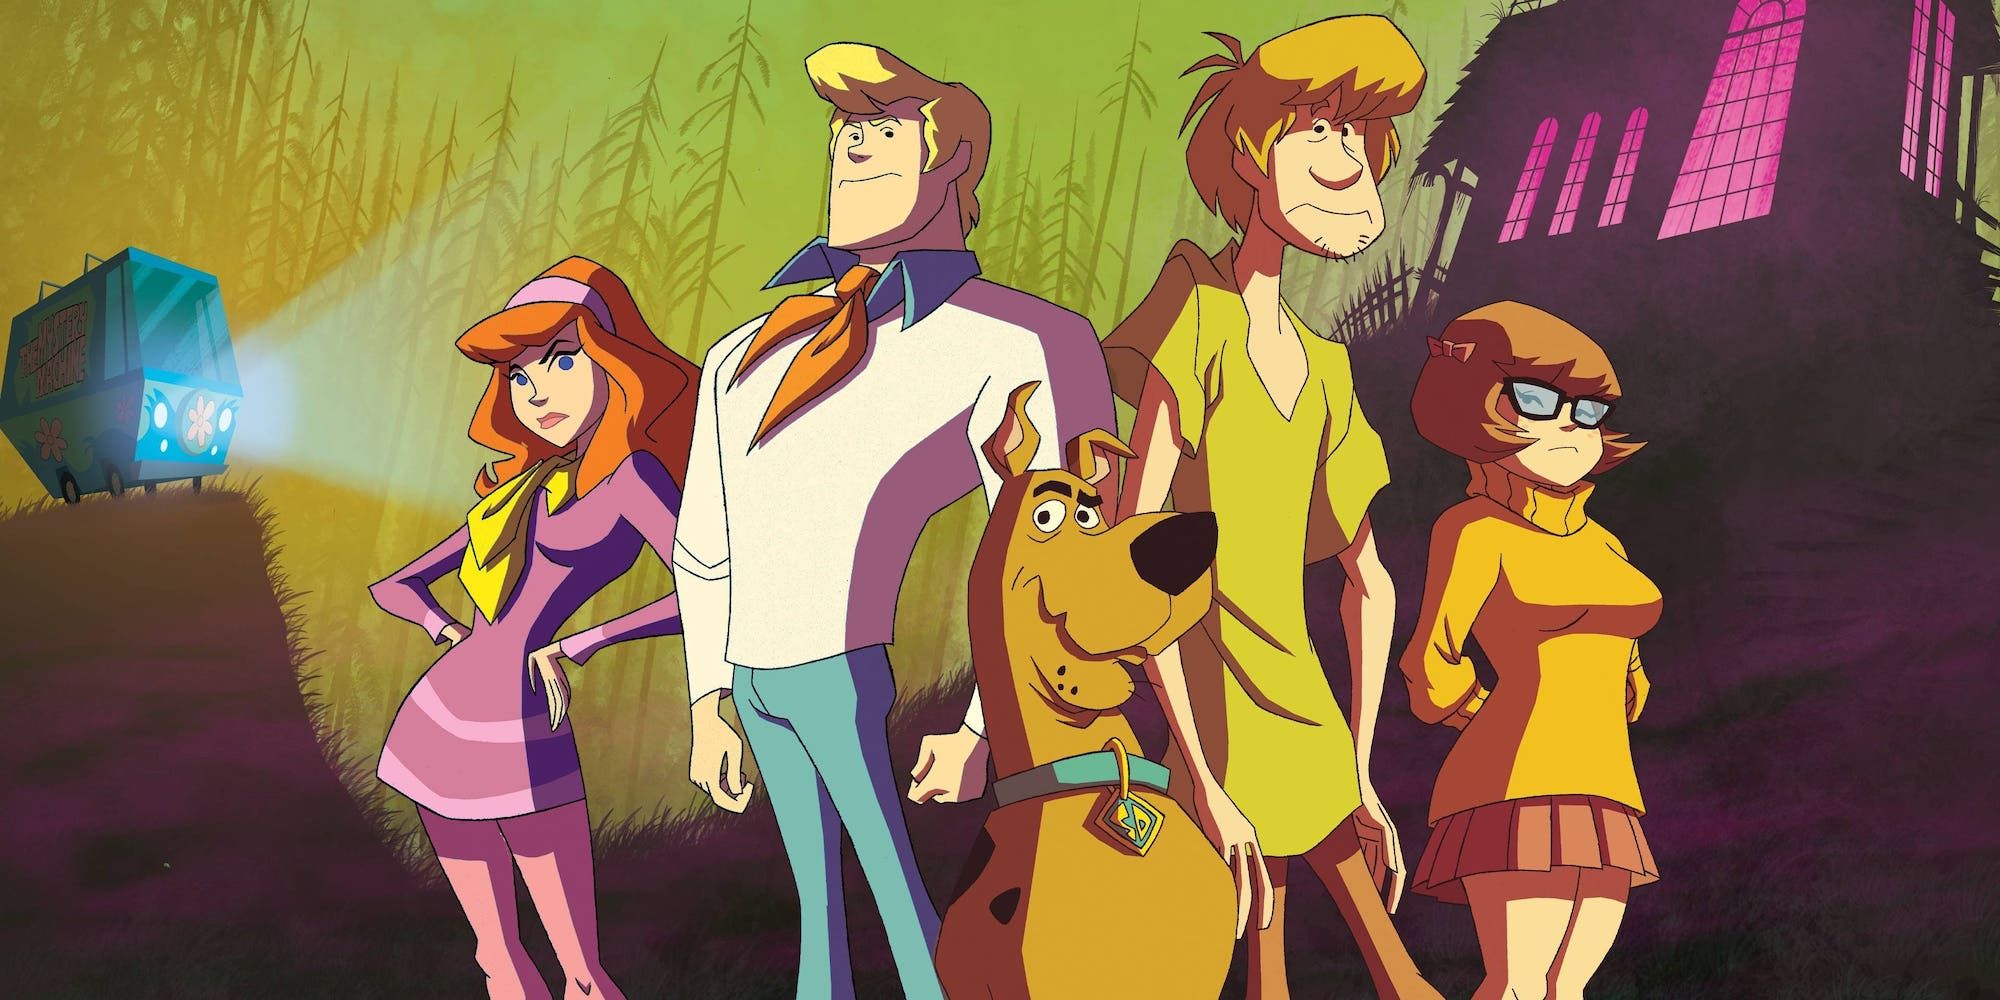 Netflix's Live-Action Scooby-Doo Has A Problem After 2 Failed Projects & 23% Rotten Tomatoes Flop